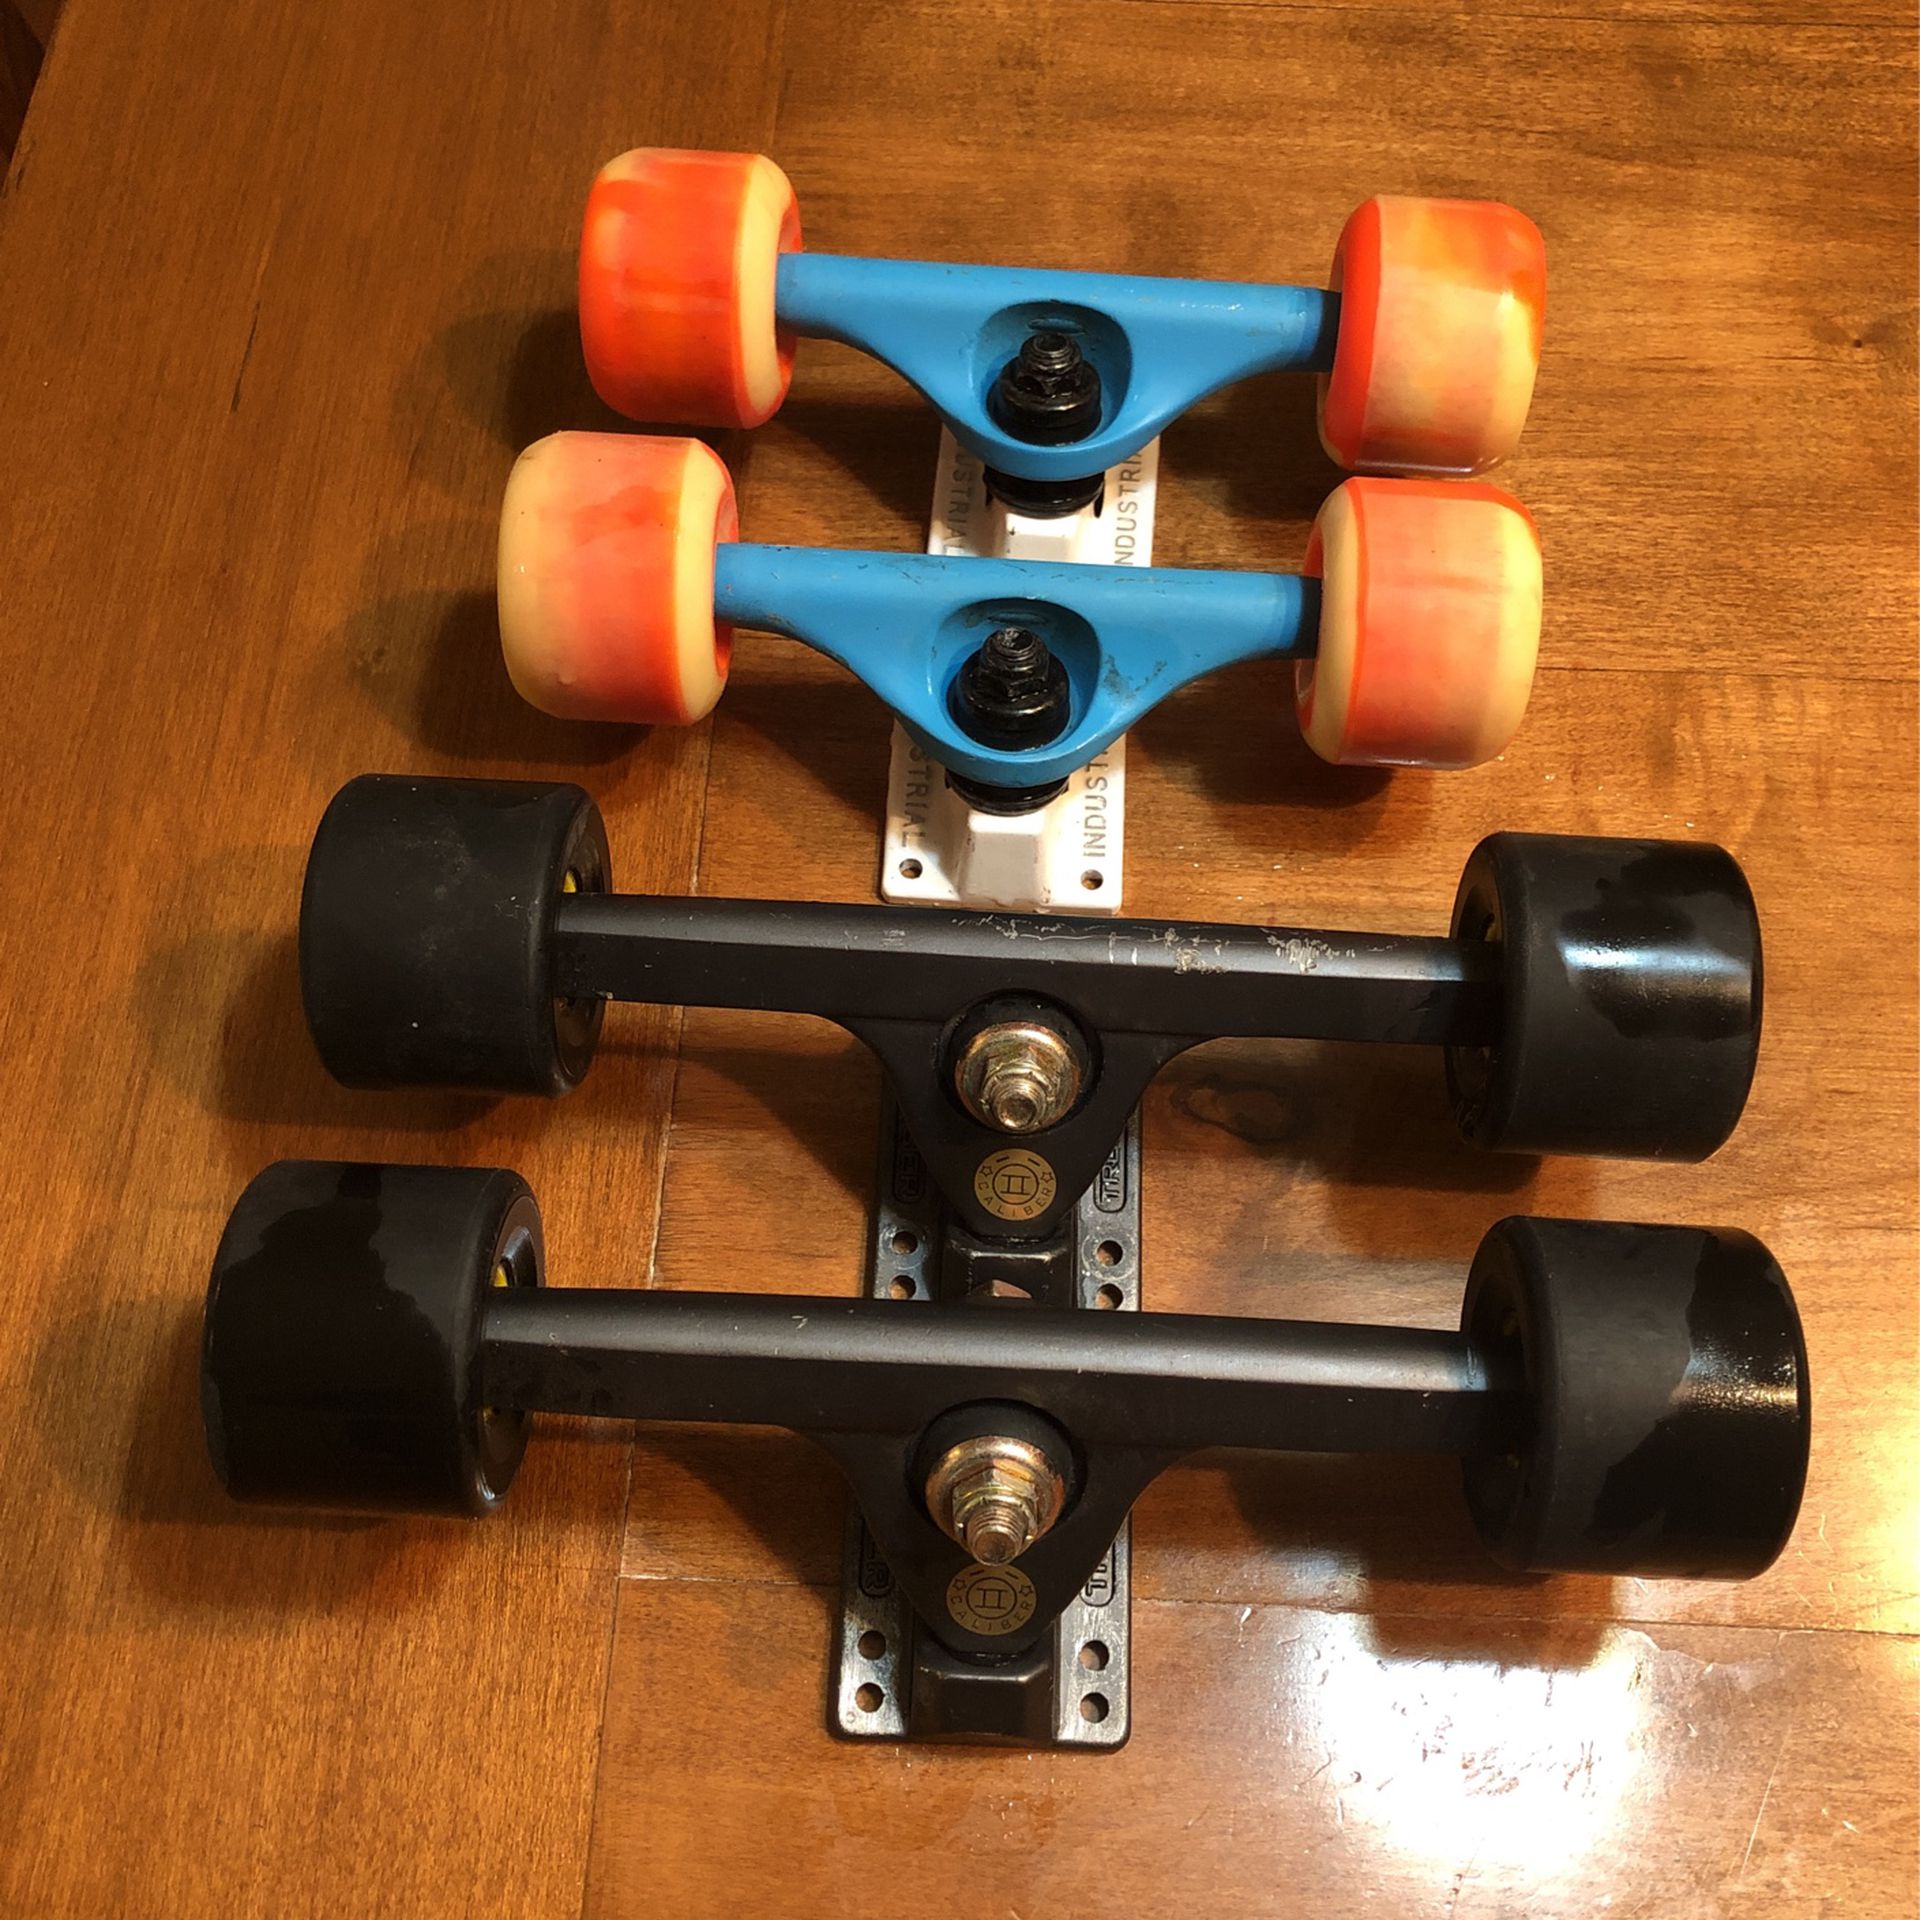 Skateboard Trucks Wheels Included $20 for a Pair